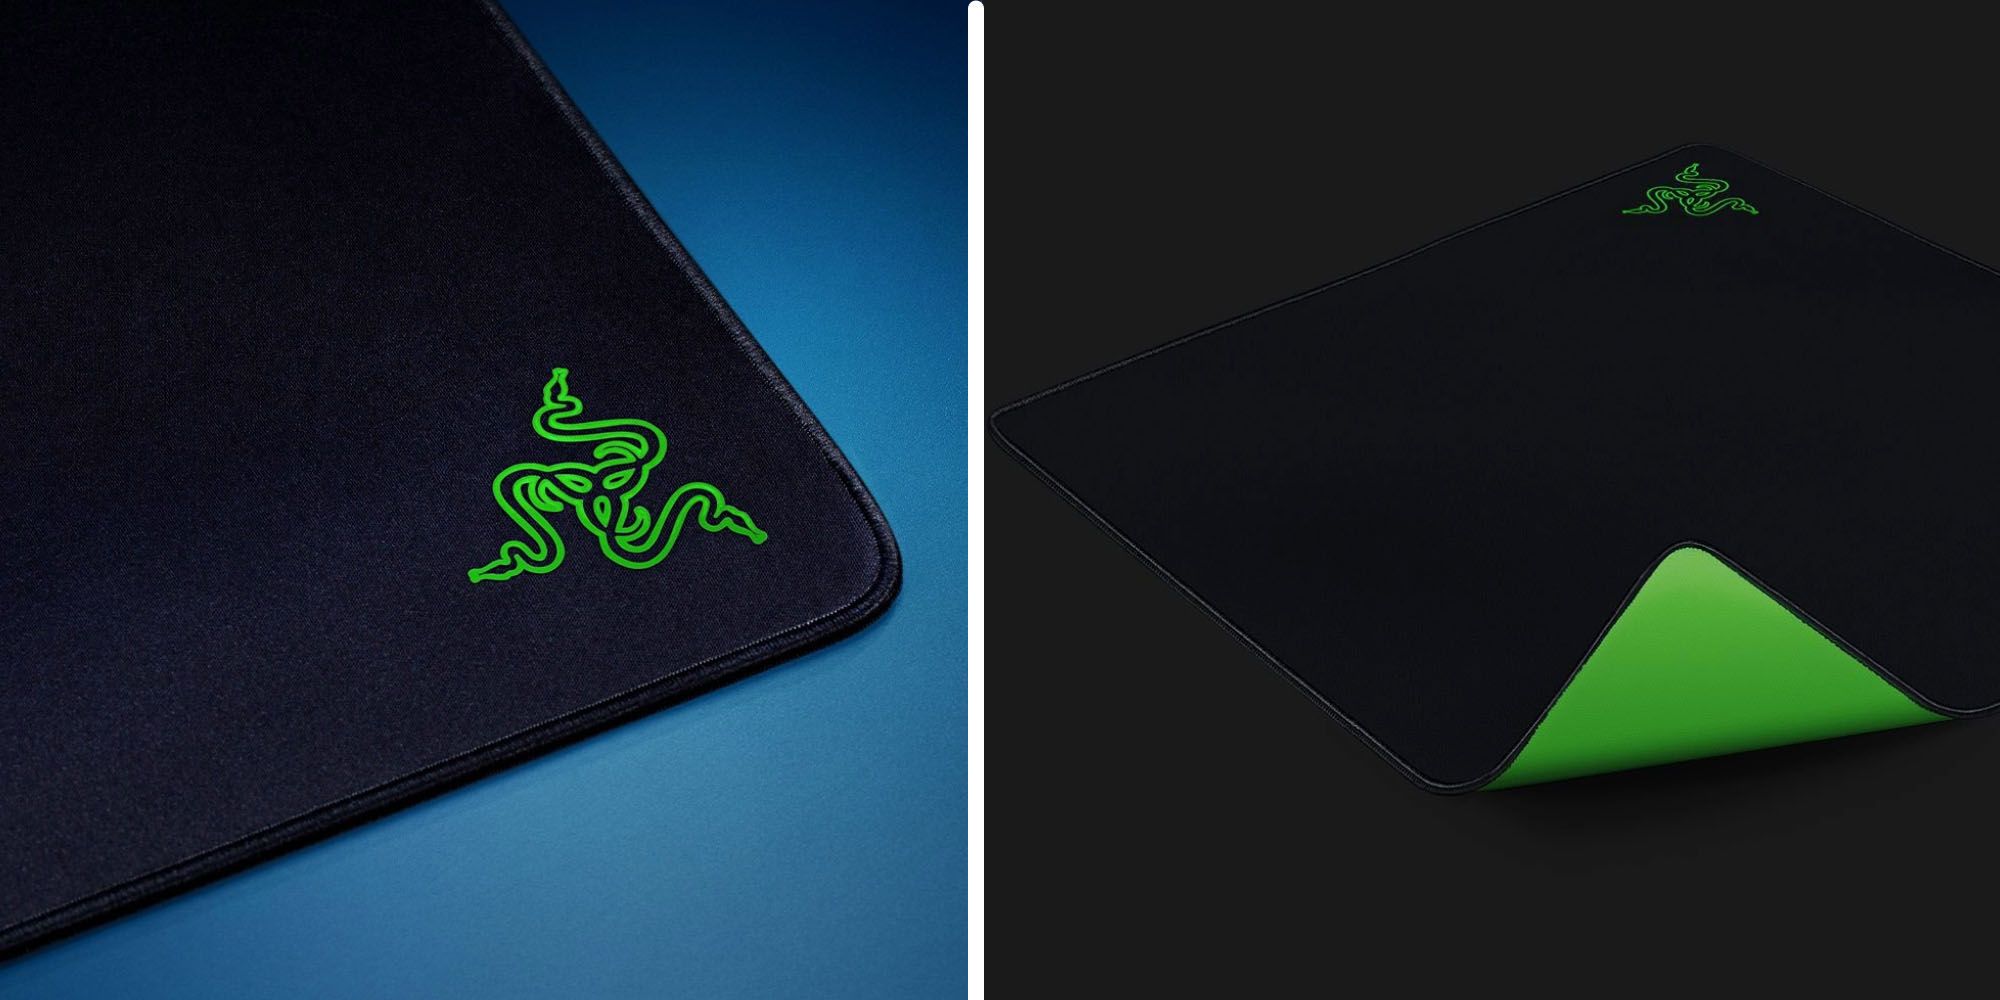 A black mouse pad with the serpent 